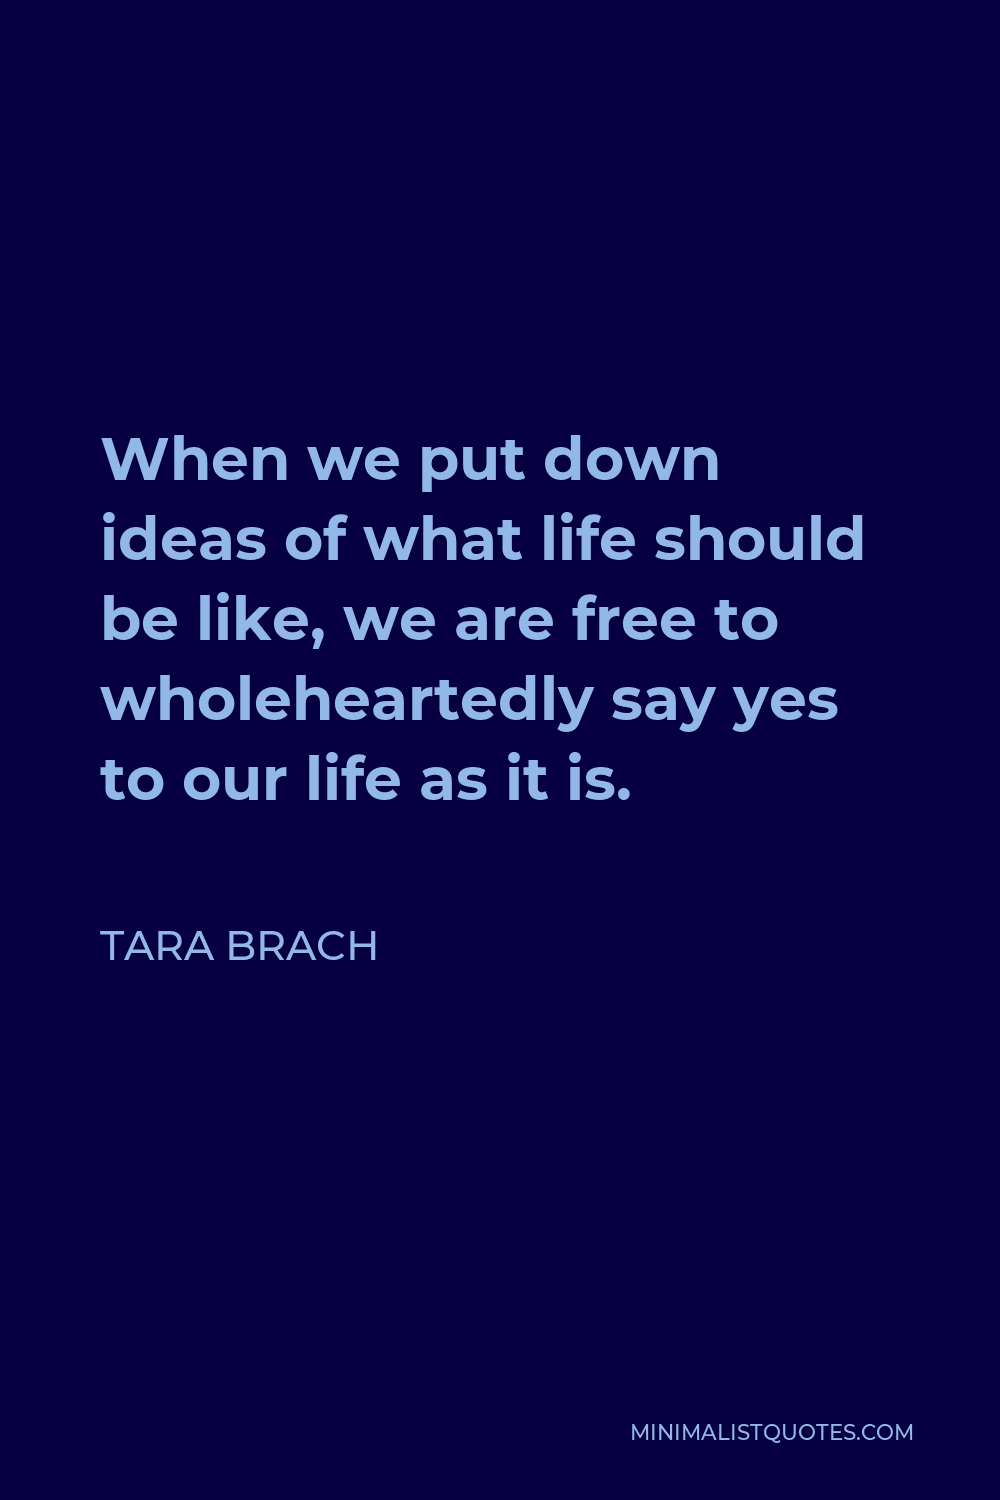 Tara Brach Quote - When we put down ideas of what life should be like, we are free to wholeheartedly say yes to our life as it is.